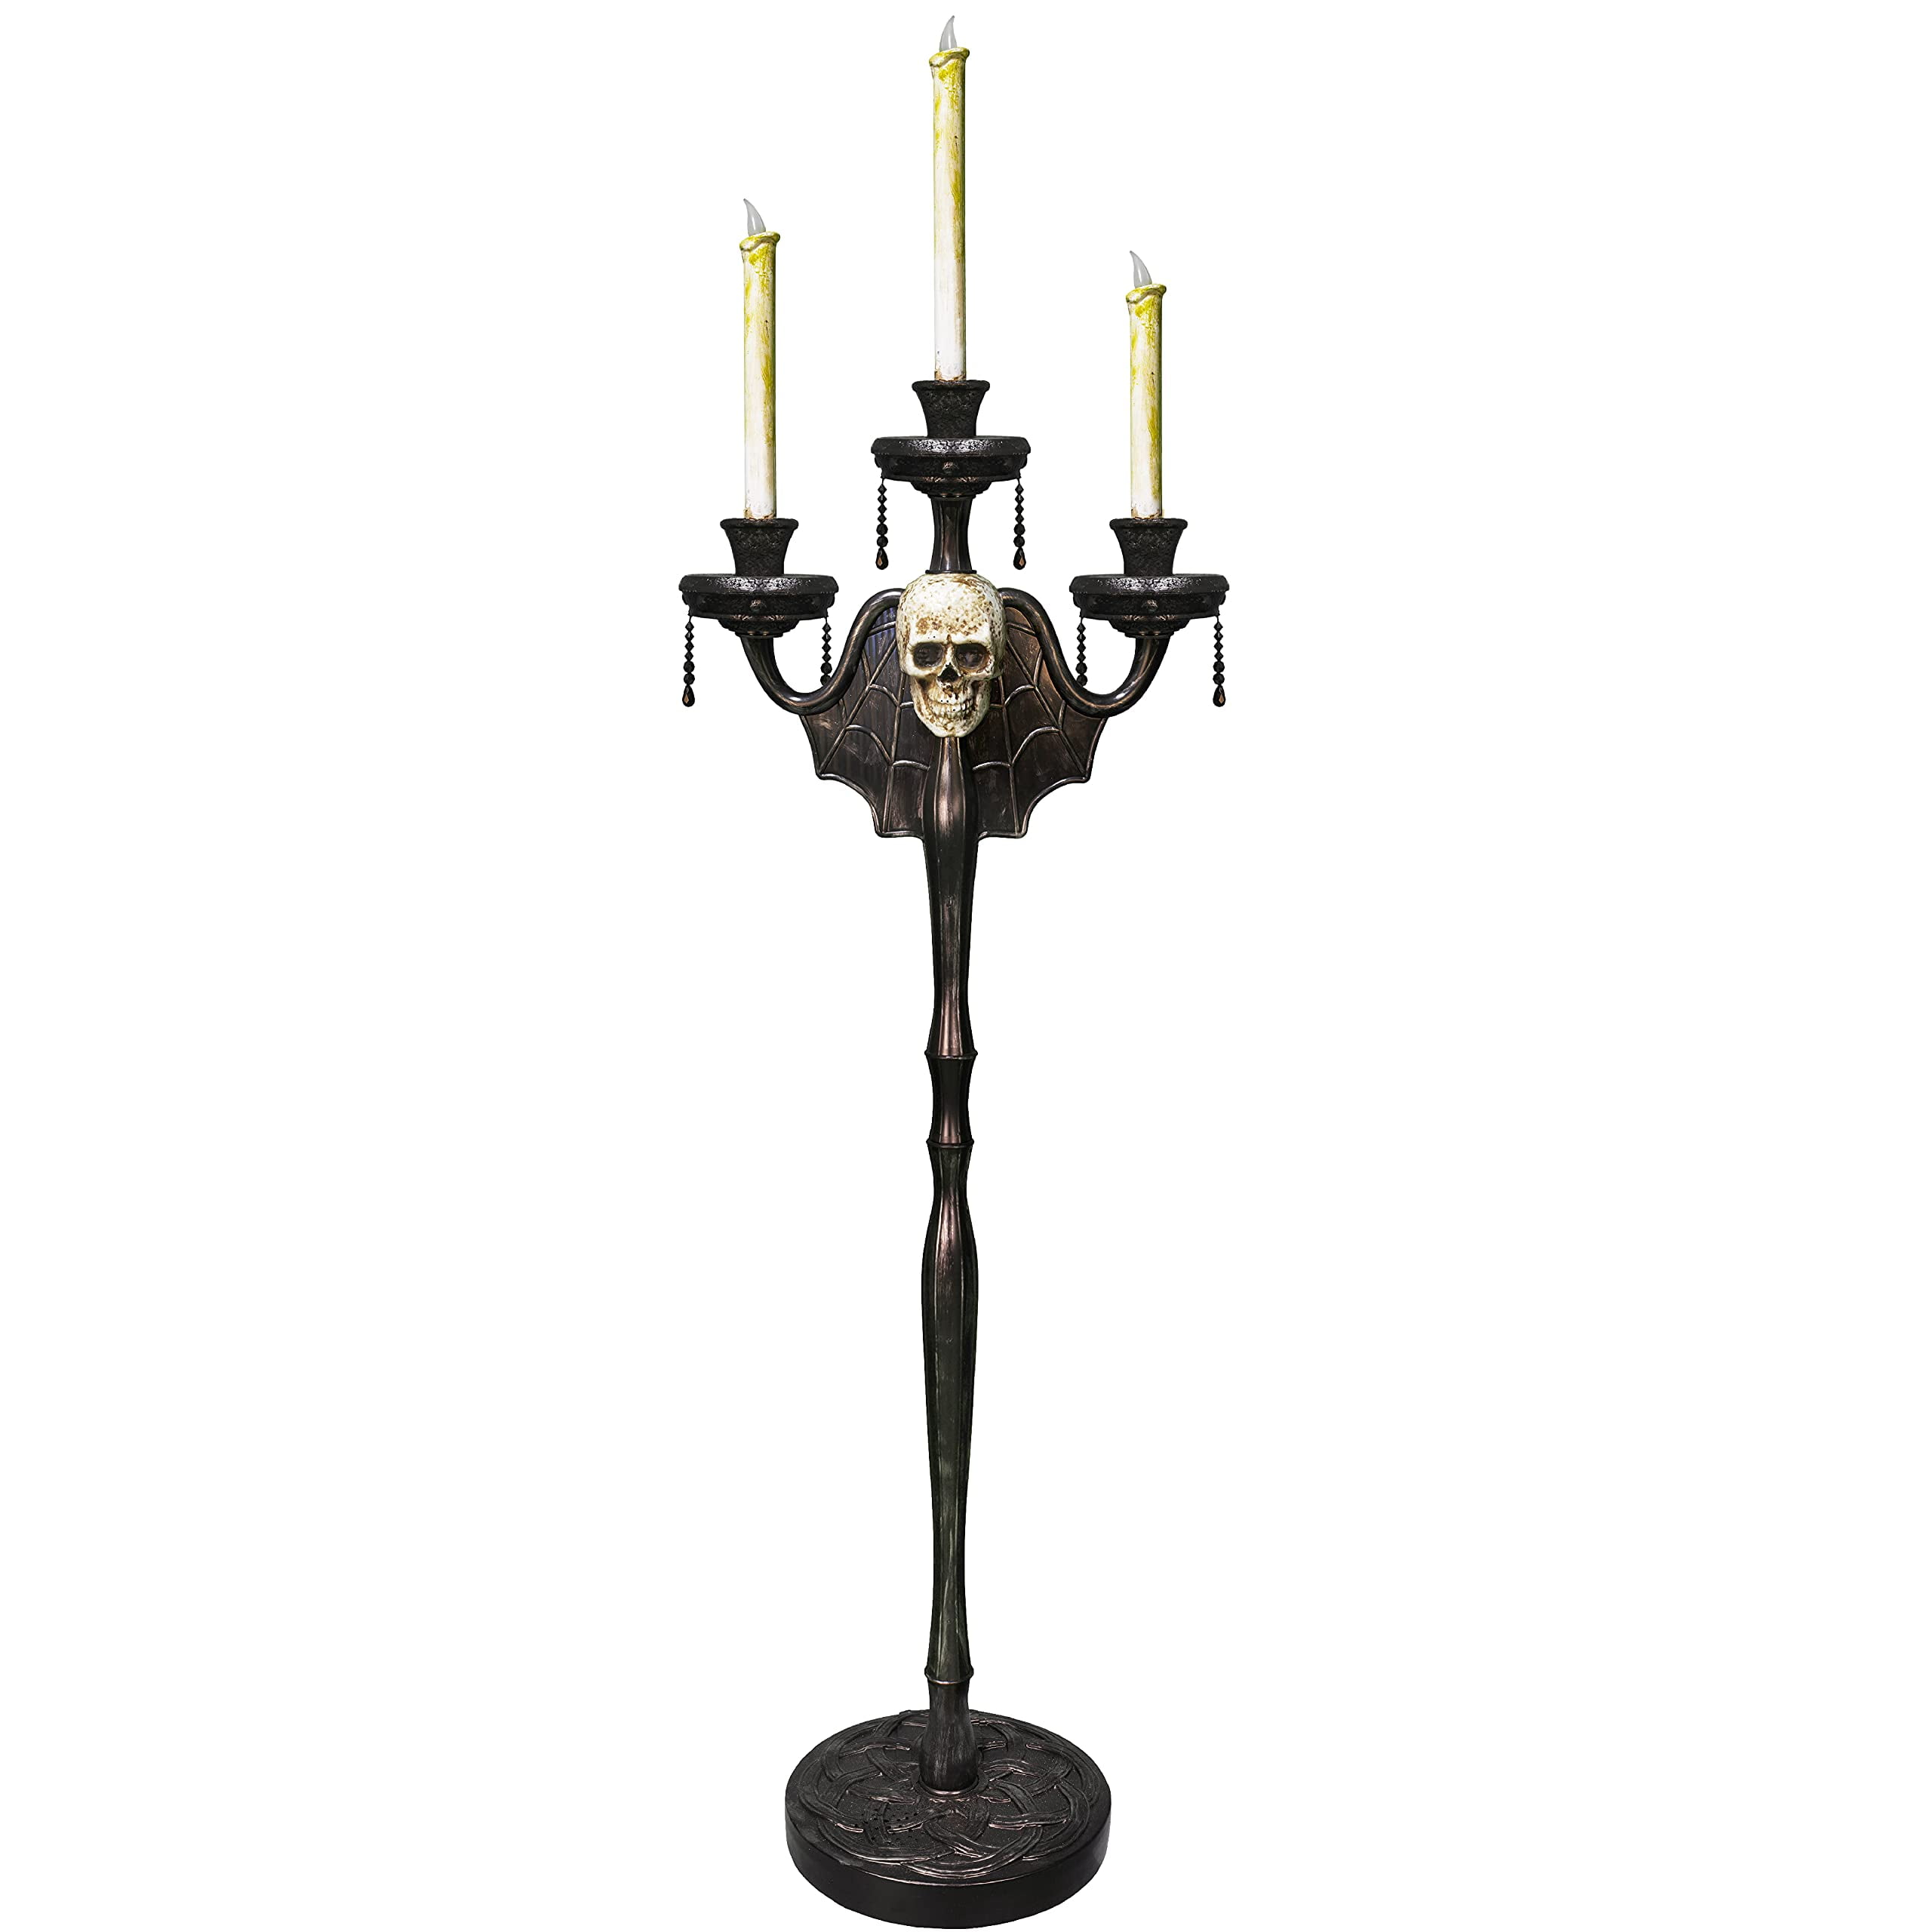 Skeleteen Animated Halloween Candelabra Decoration - Creepy Gothic Haunted  Mansion Black Skull Floating Candle Holder Party Decorations Prop 